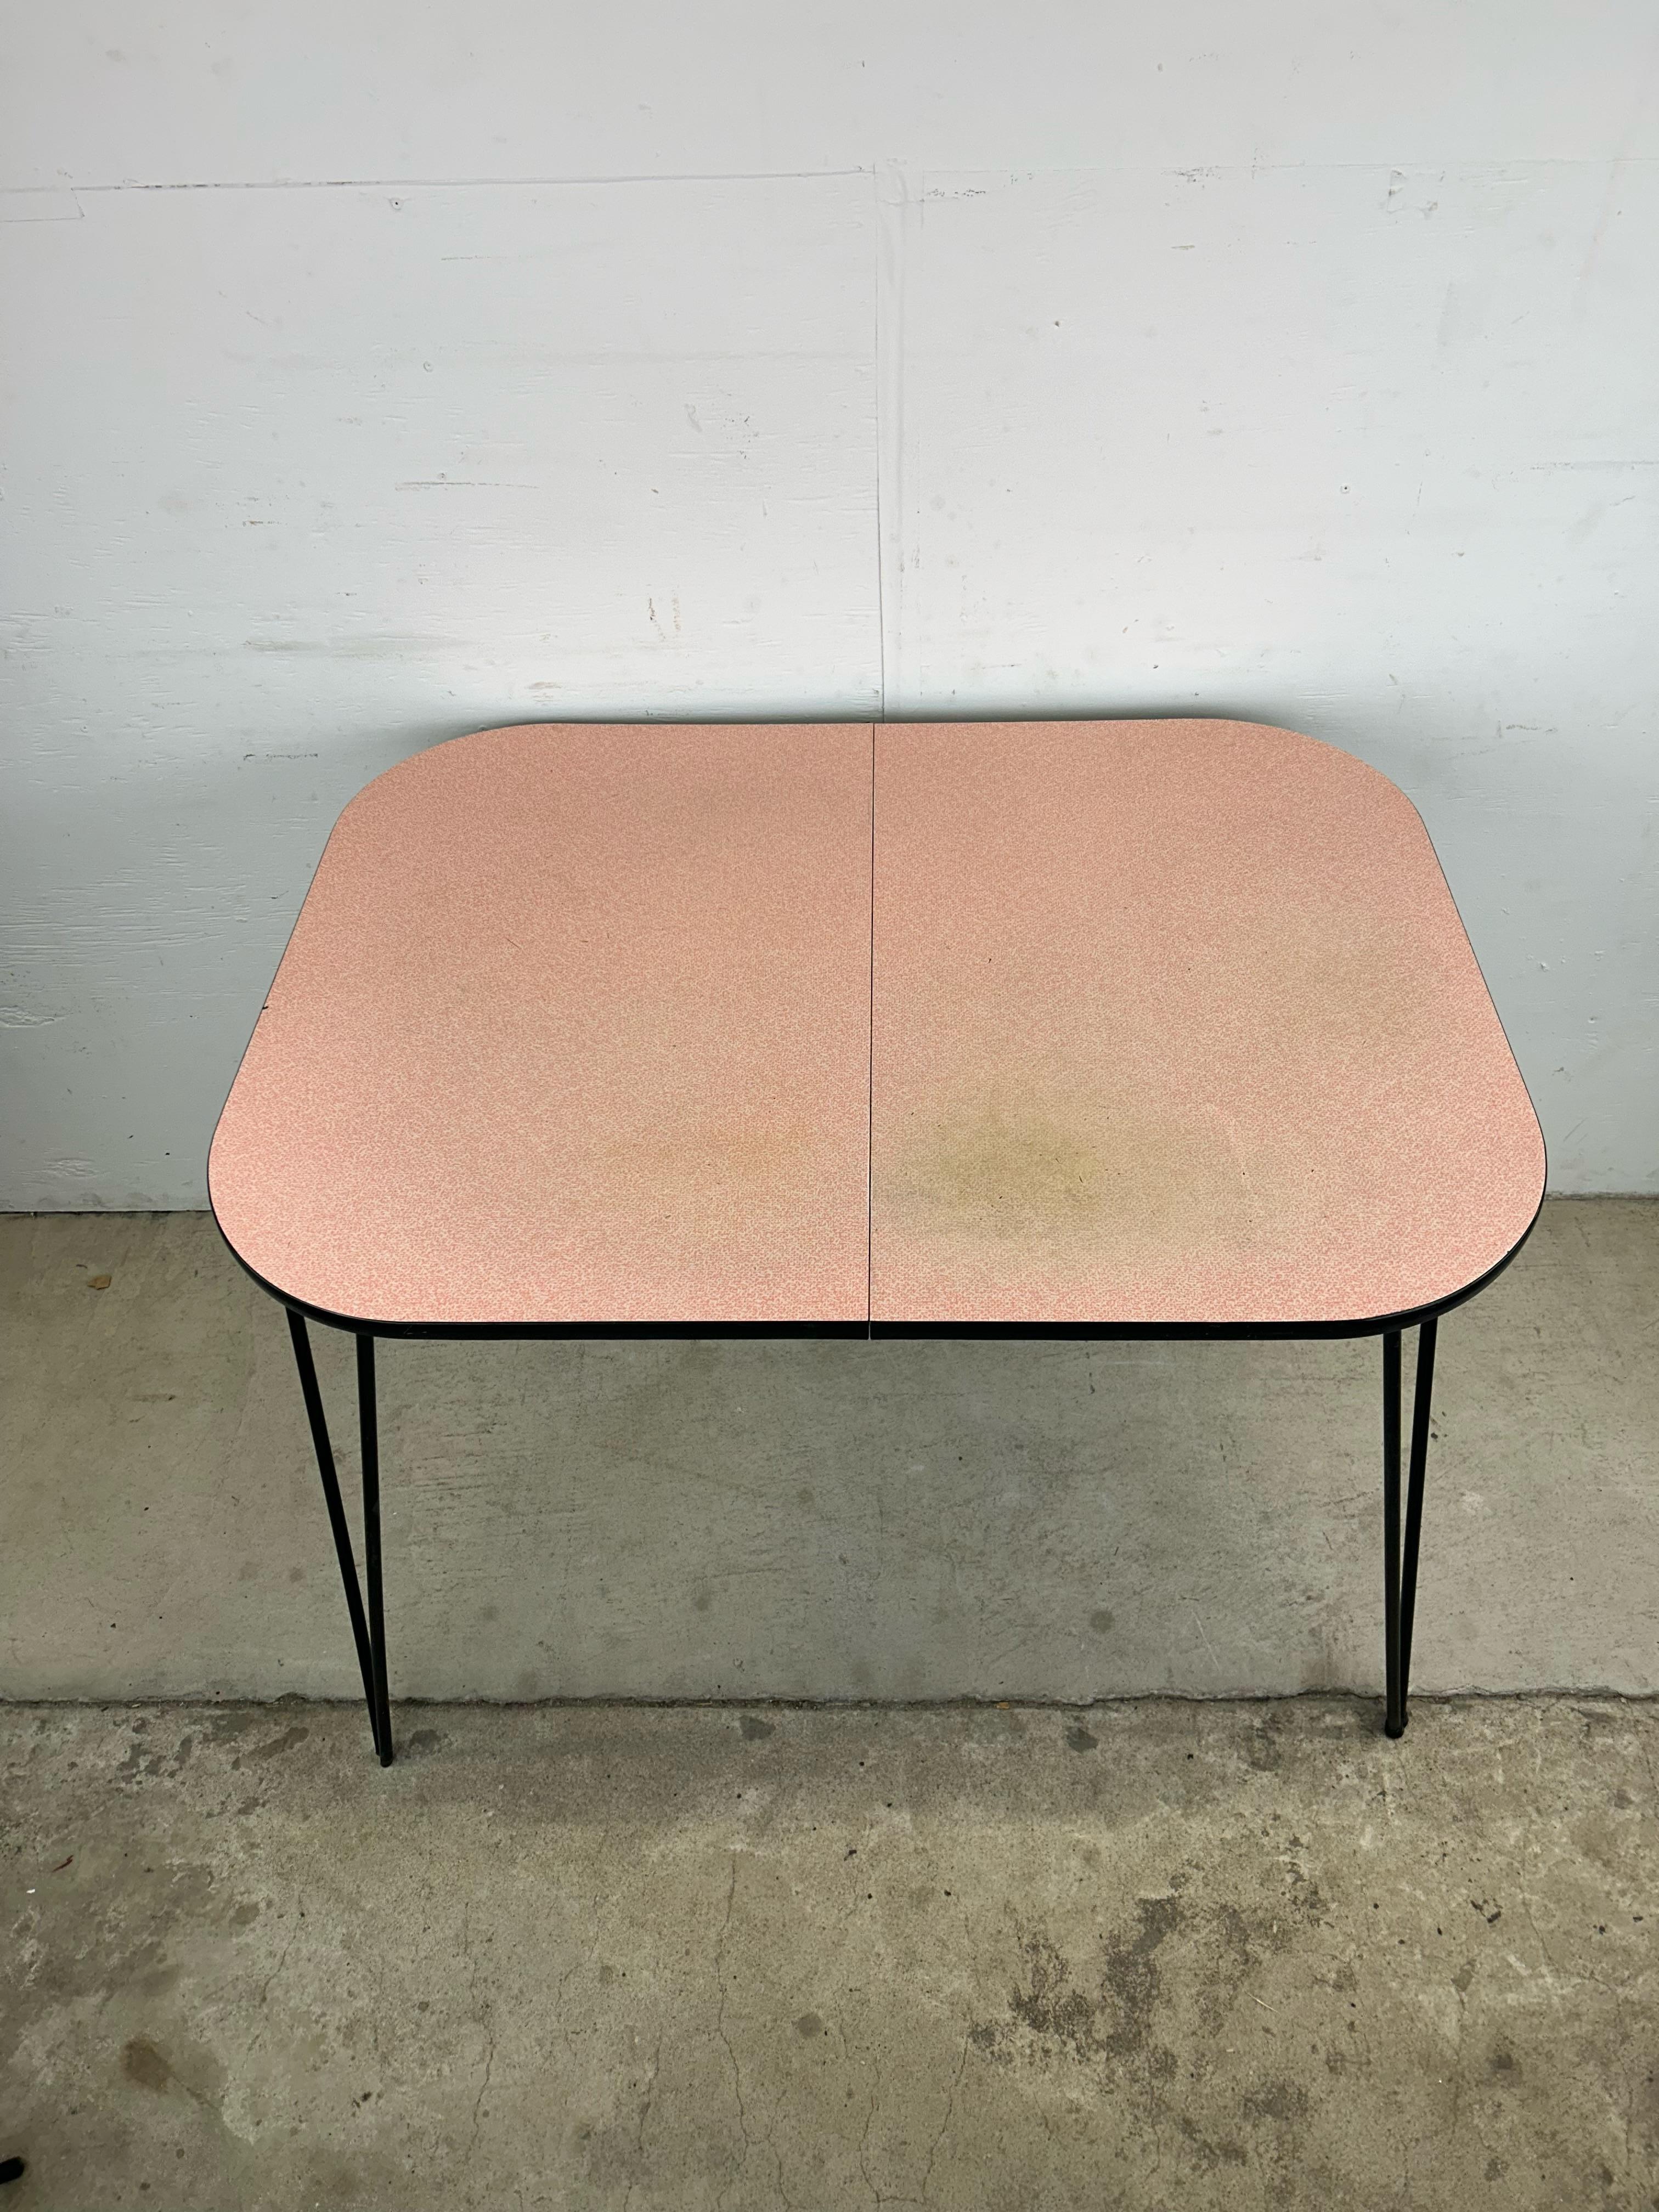 American Mid Century Modern Pink & White Dining Table with Hairpin Legs For Sale